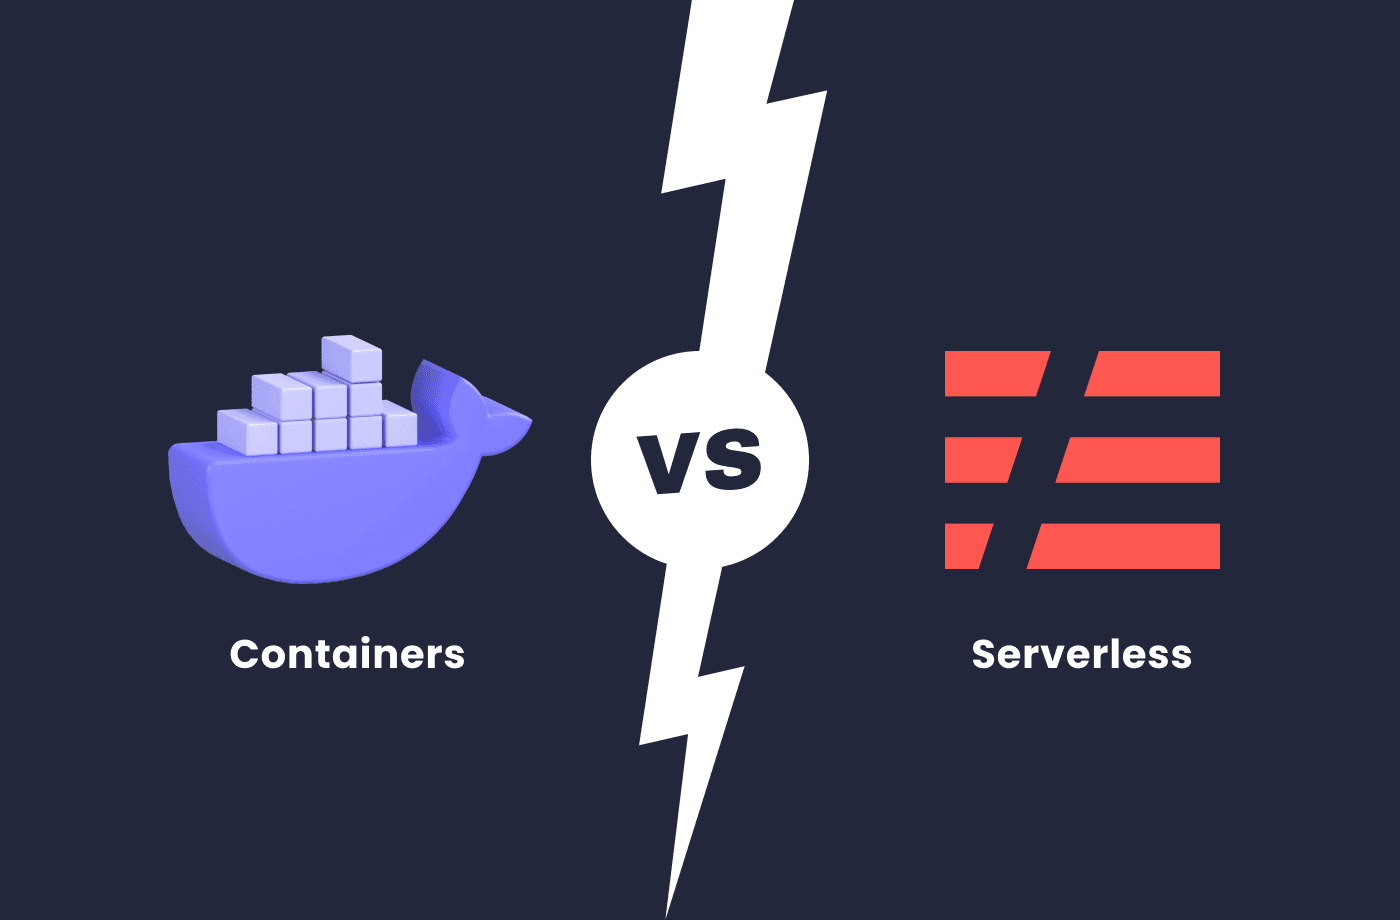 Serverless vs. Containers for Microservices: What should you choose